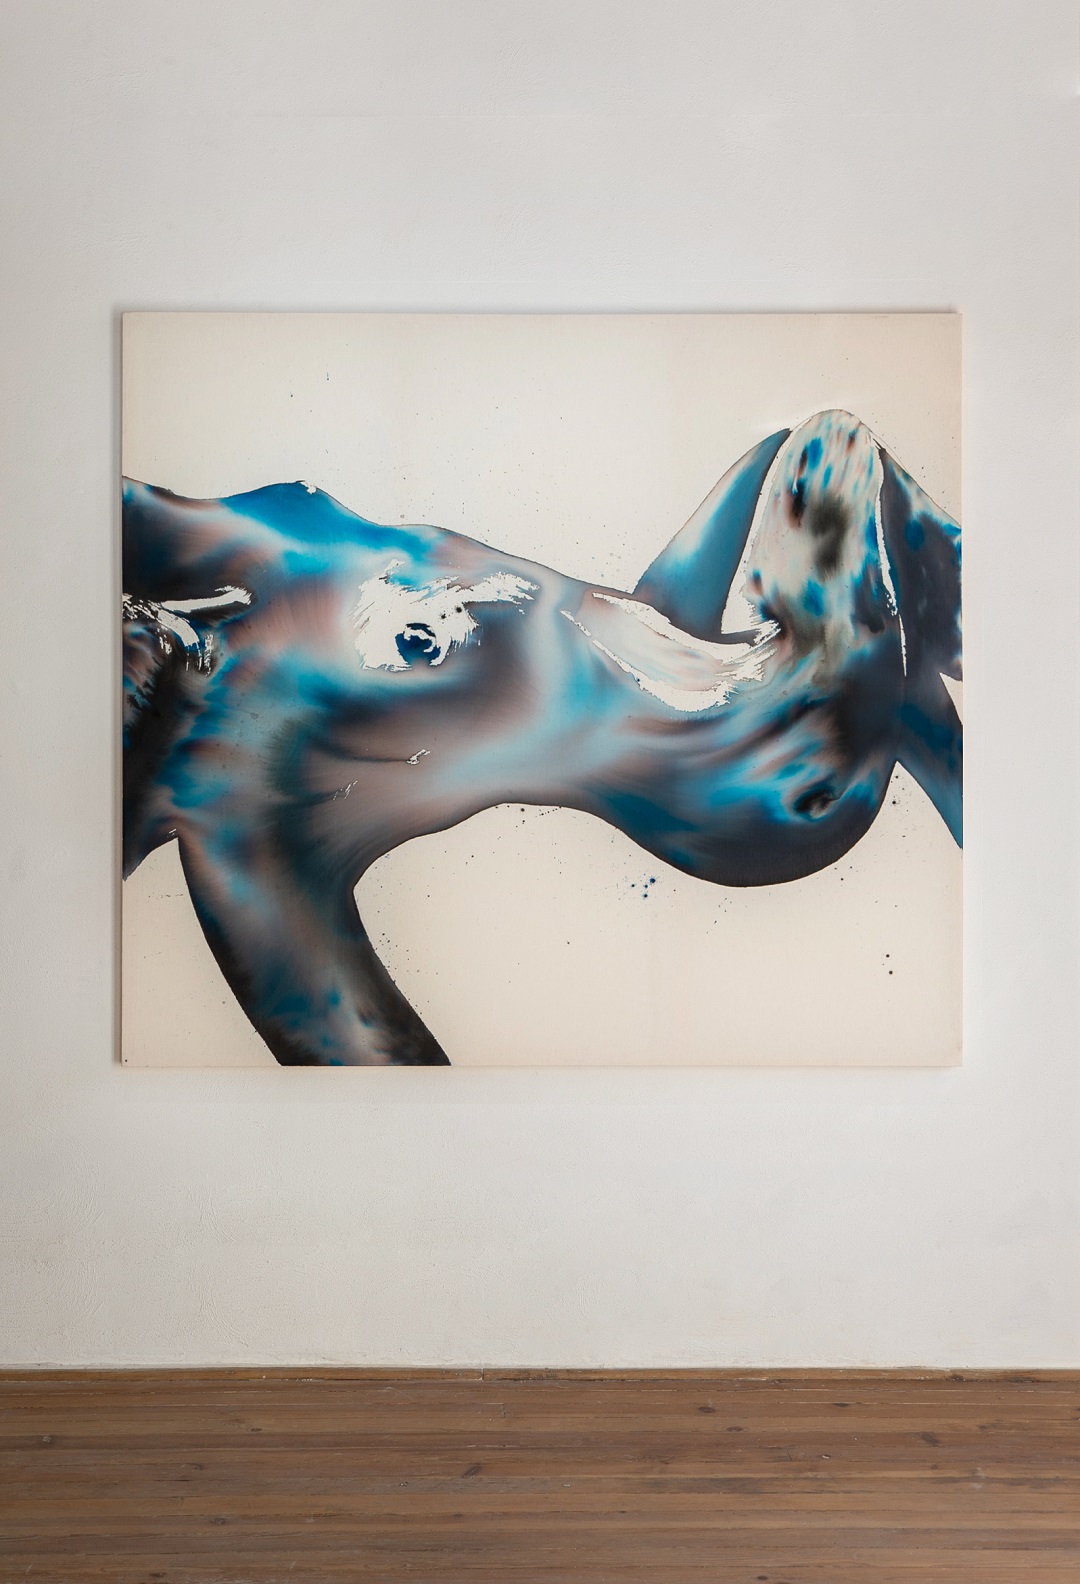 Tobias Ross-Southall Nuevos Animales VIII, 2022 Watercolour, Indian ink and bleach on raw canvas 180 x 200 cm